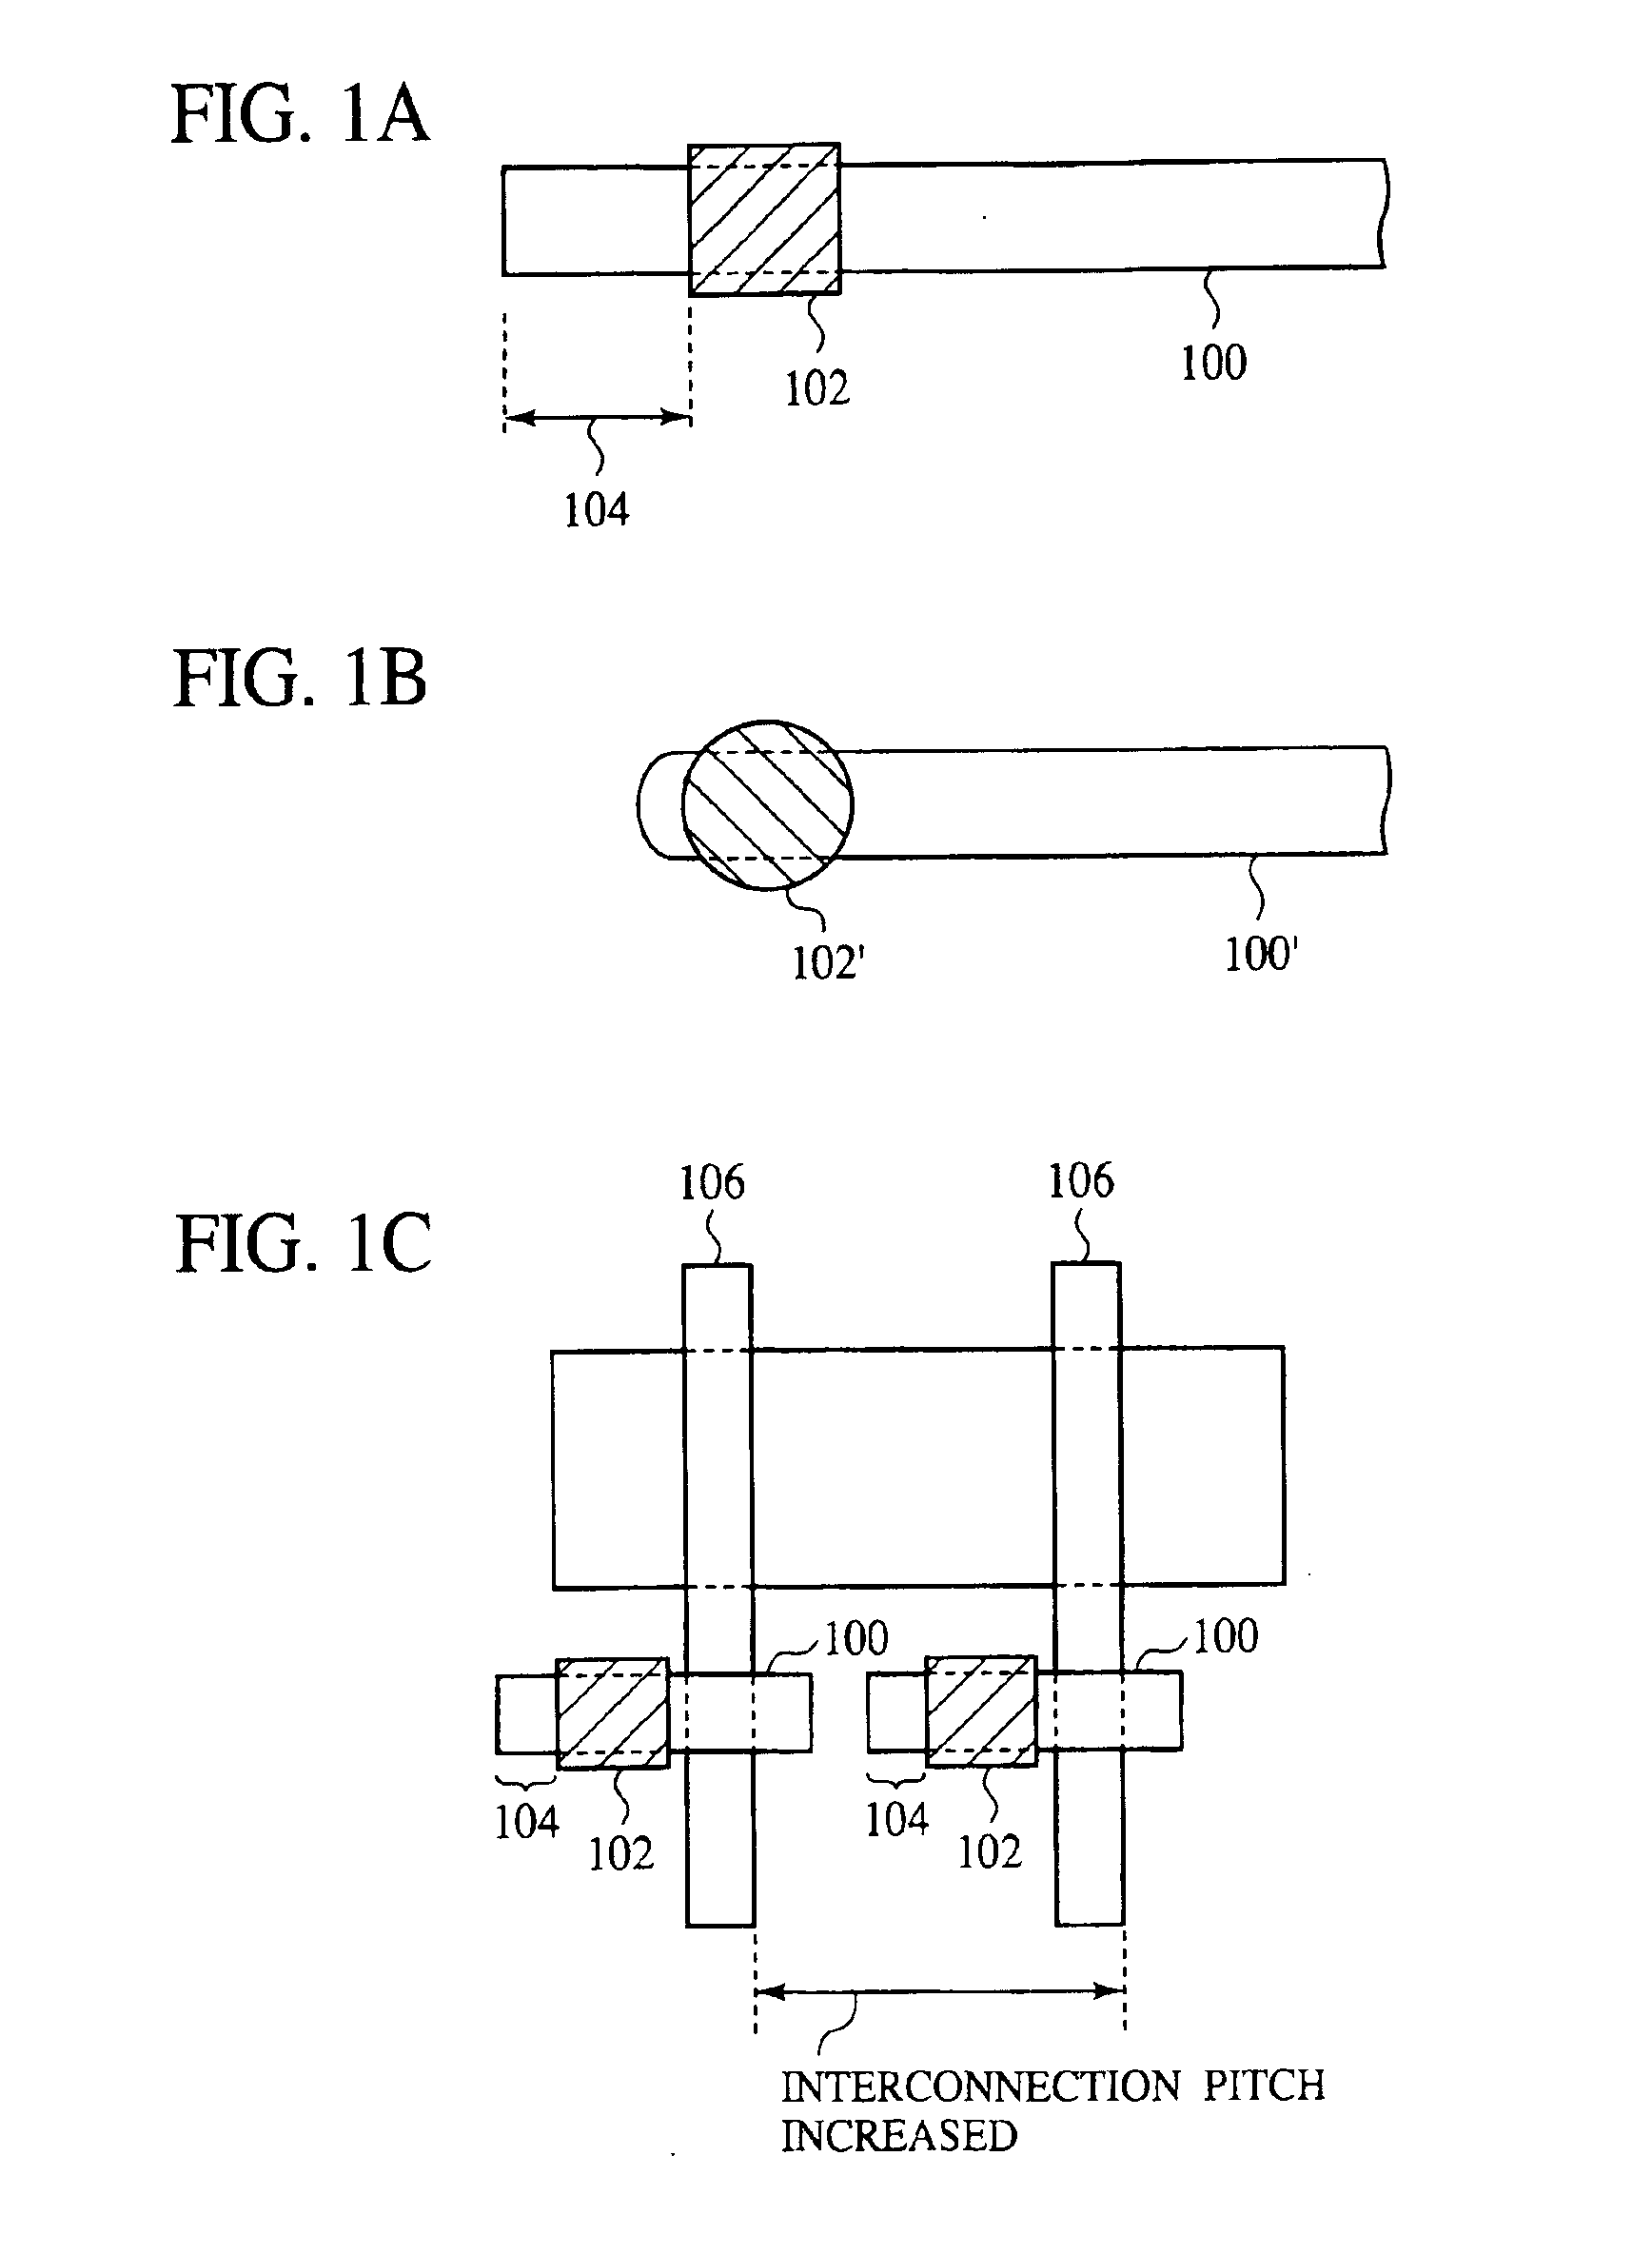 Semiconductor device including an electrical contact connected to an interconnection